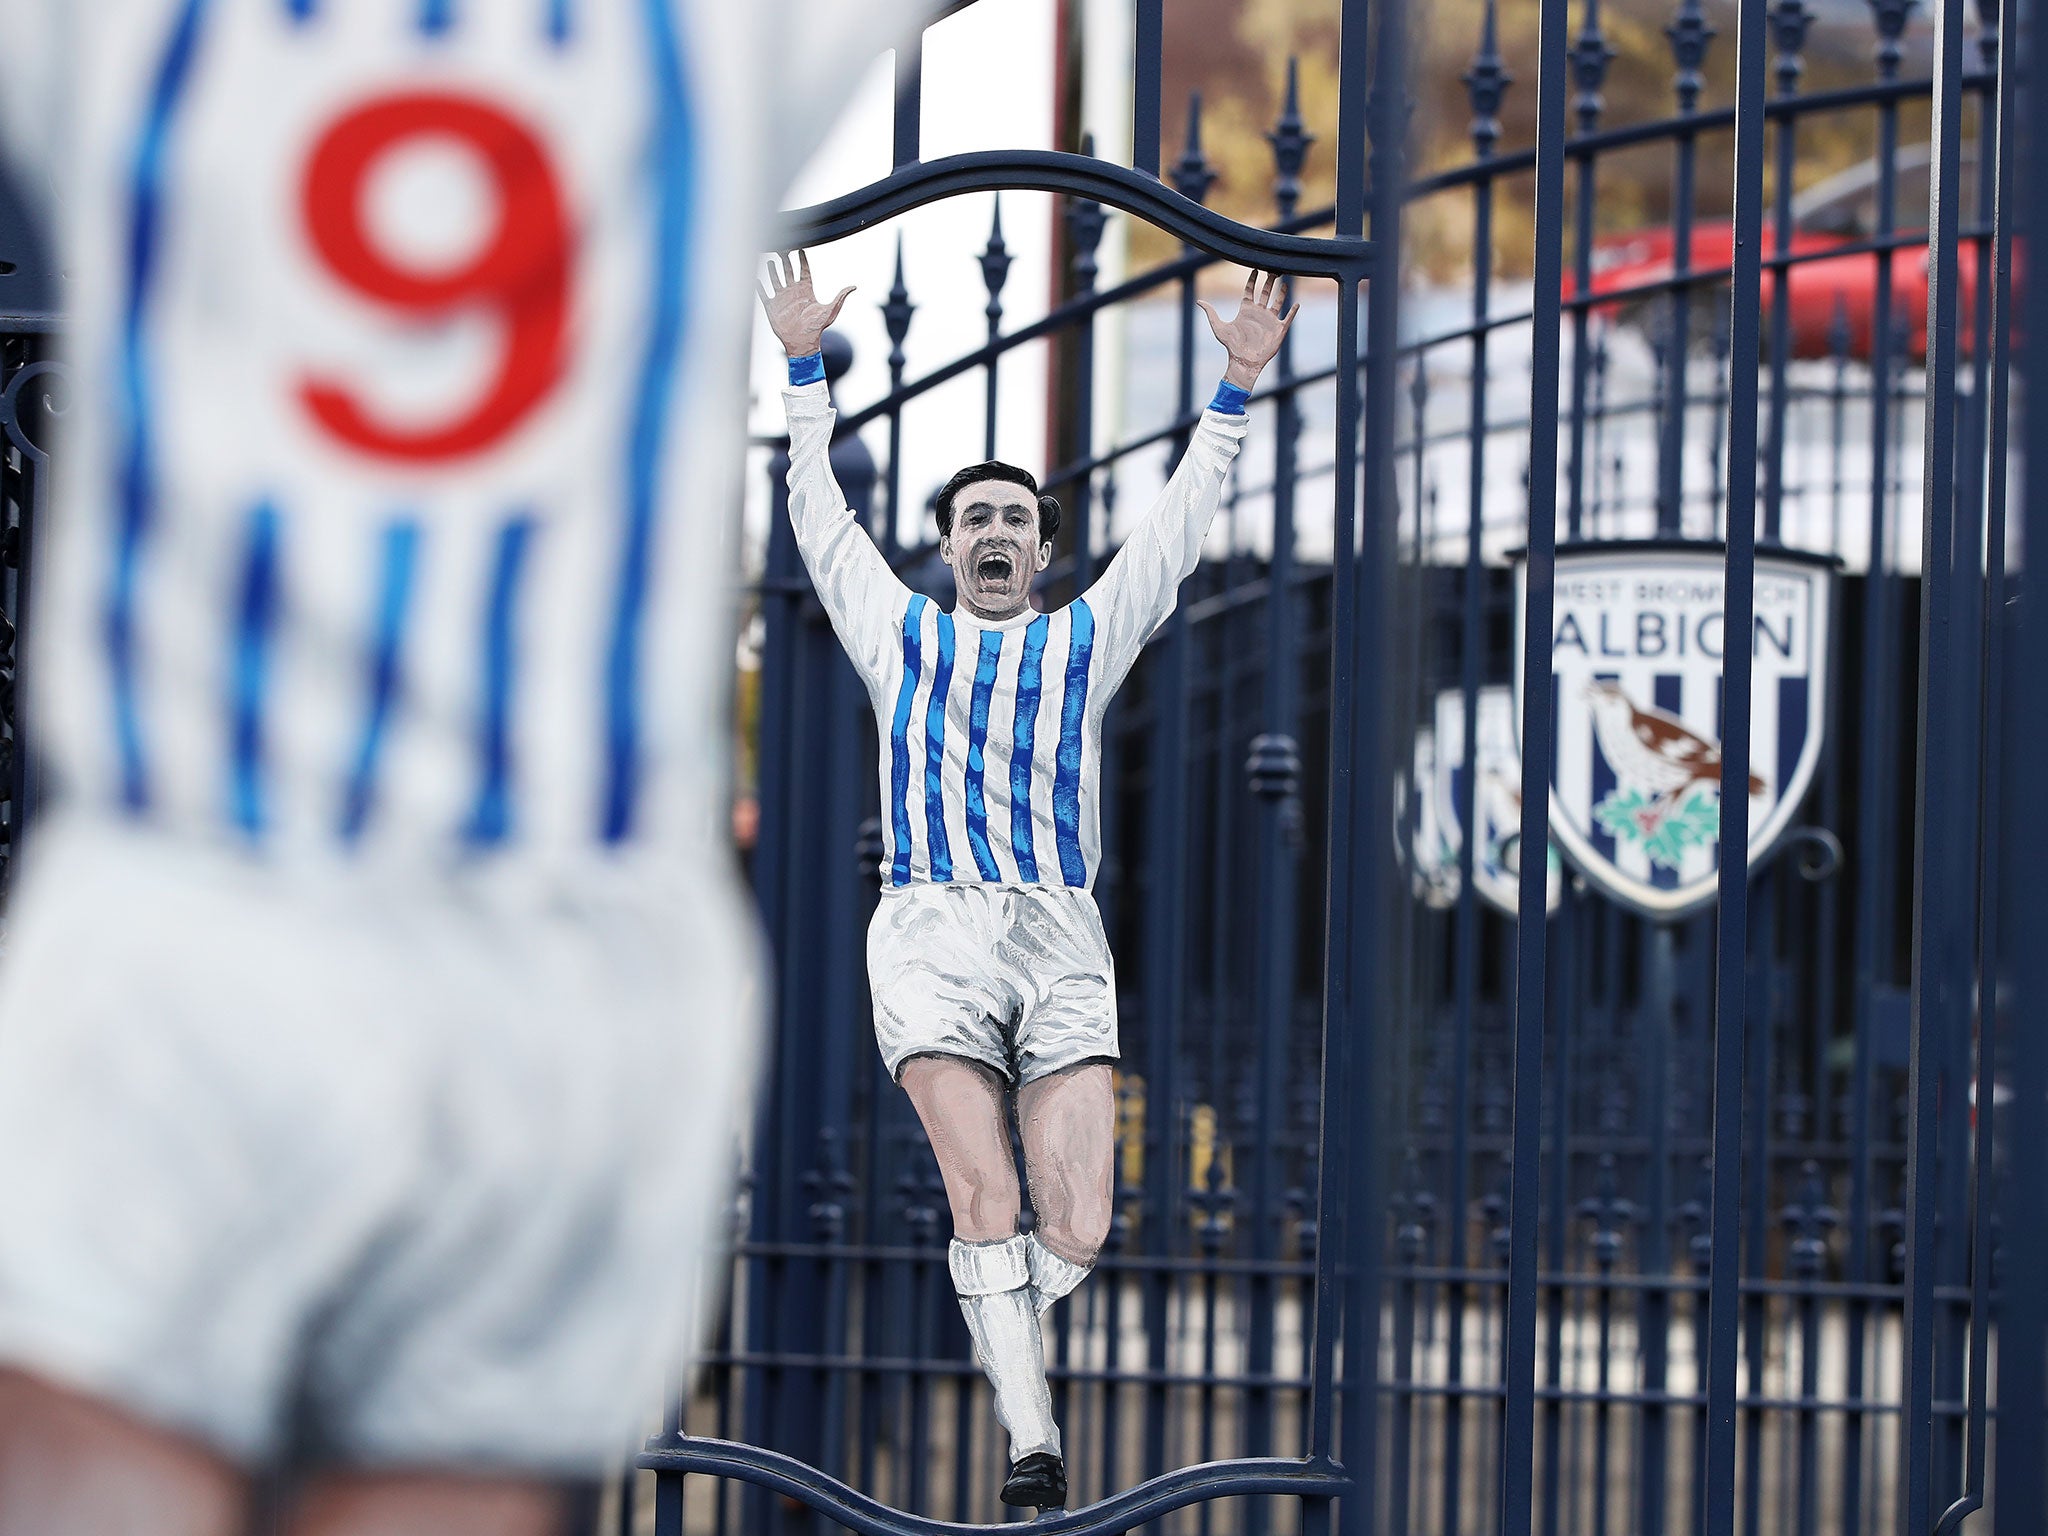 The Jeff Astle gates at The Hawthorns